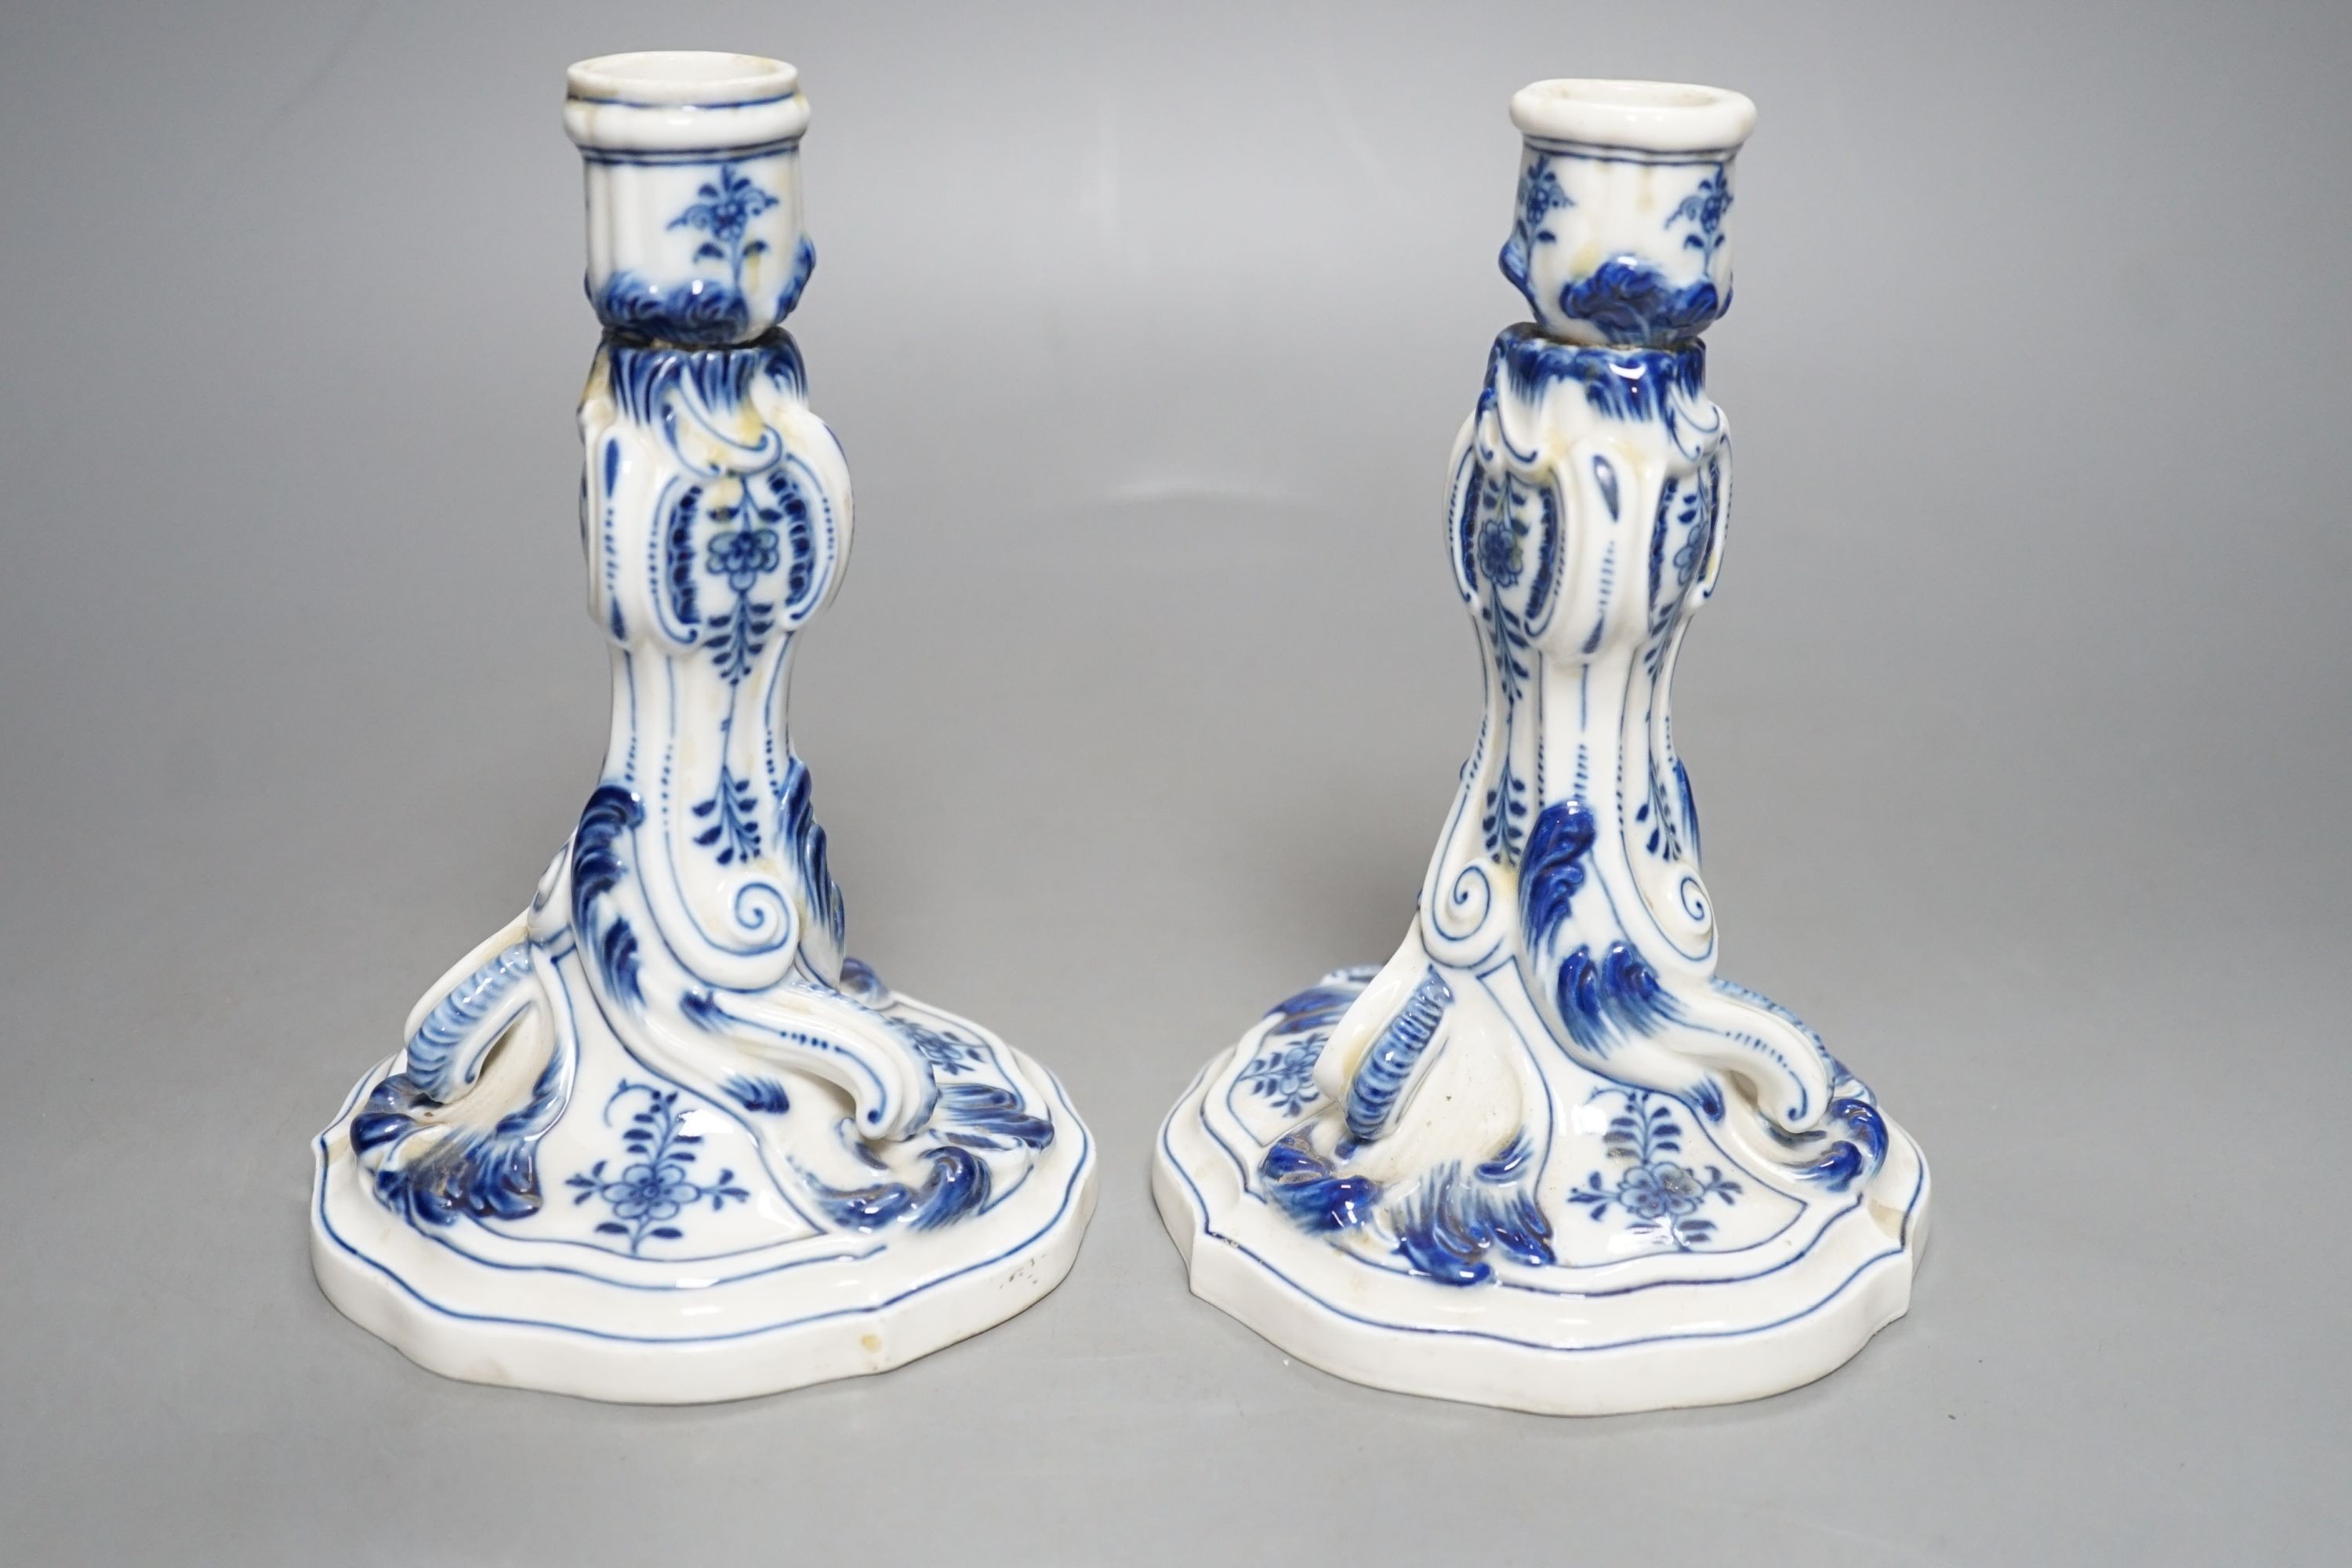 A pair of late 19th century blue and white Meissen onion pattern candlesticks - 17cm tall